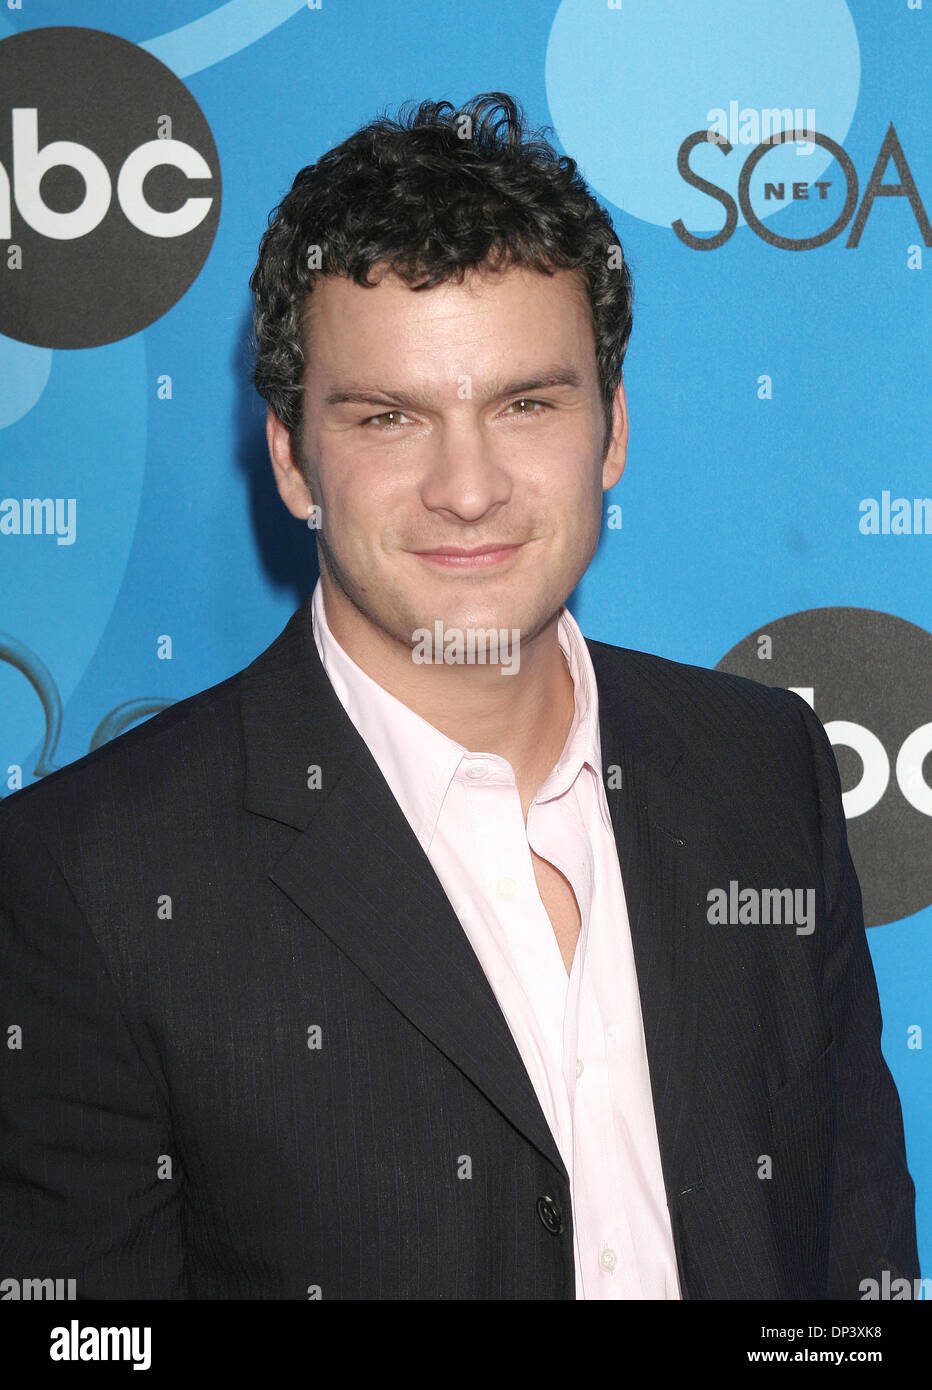 Jul 19, 2006; Los Angeles, CA, USA; Actor BALTHAZAR GETTY at the ABC Summer Press Tour Party held at The Wisteria Courtyard at Kidspace Children's Museum, Pasadena, CA. Mandatory Credit: Photo by Paul Fenton/ZUMA KPA.. (©) Copyright 2006 by Paul Fenton Stock Photo